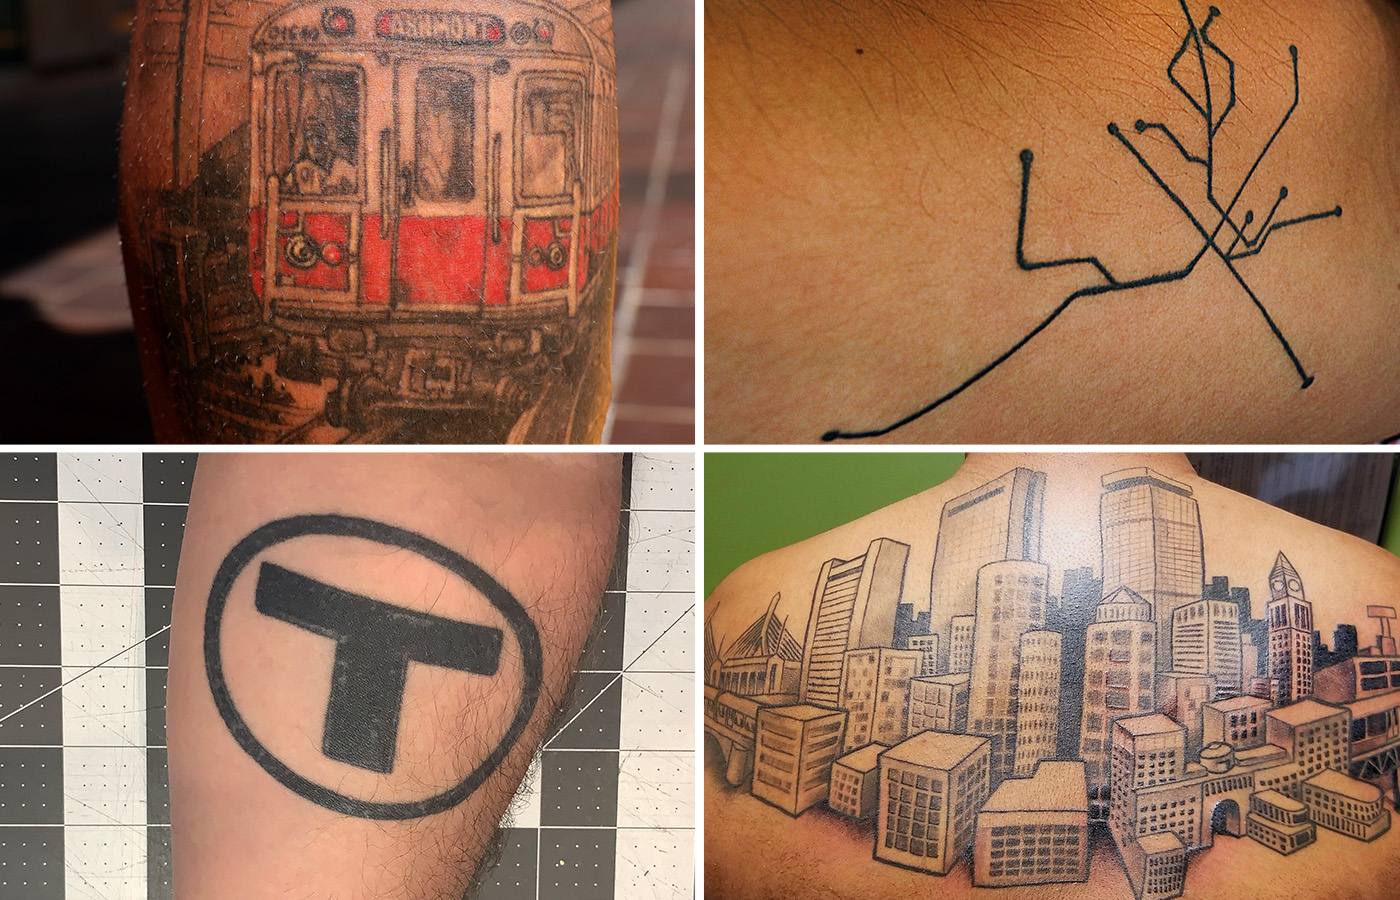 Artist Who Specializes in Purposefully Bad Tattoos Captivates Internet